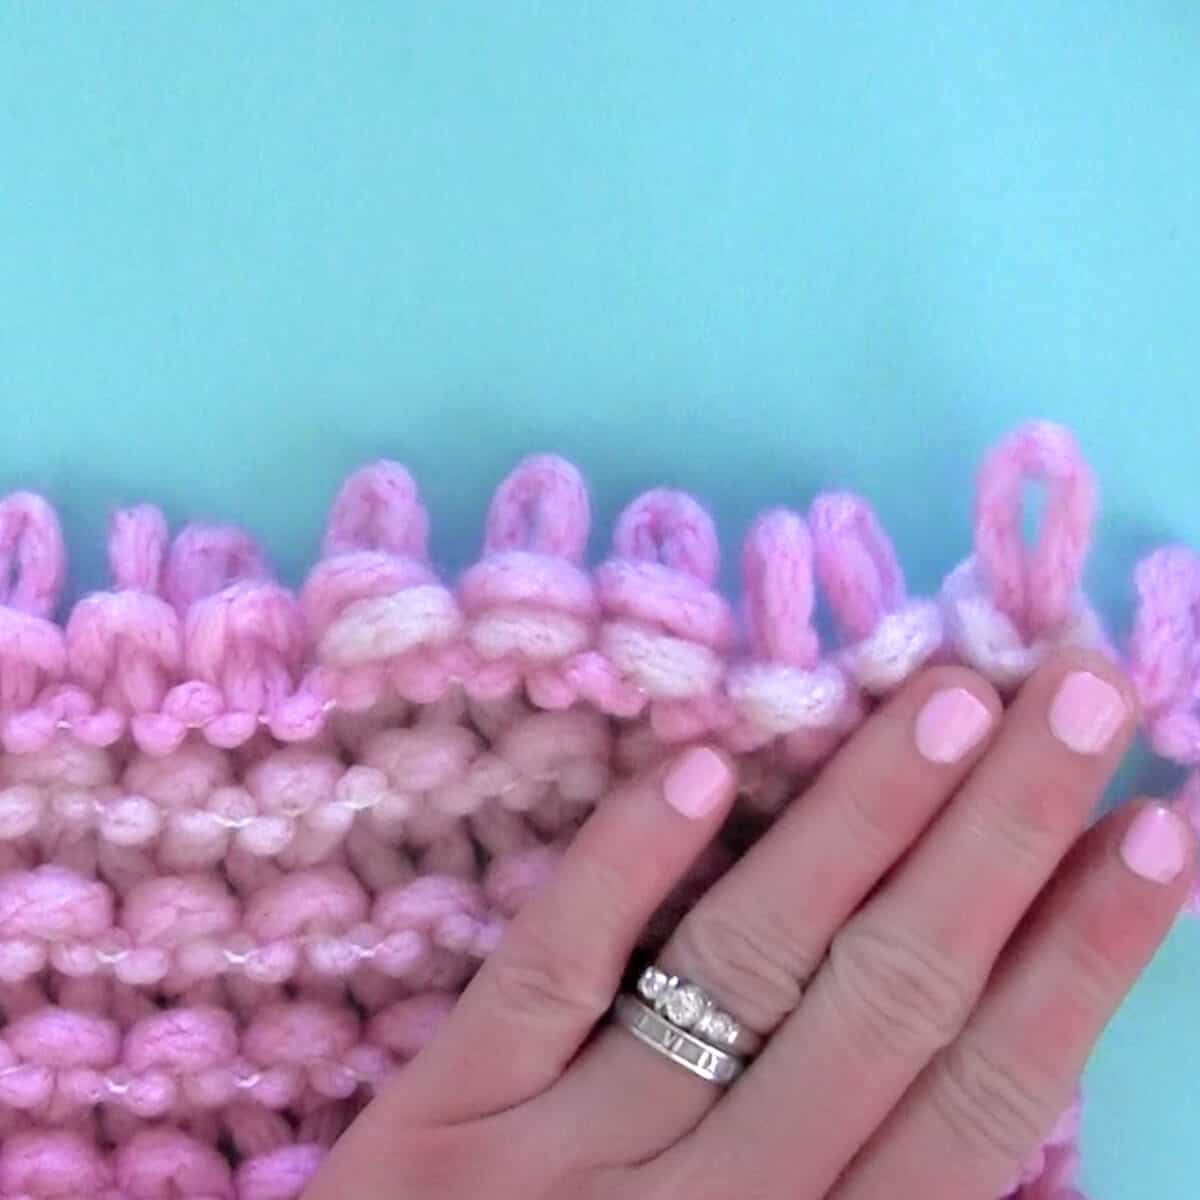 Loop yarn in pink color with woman's hand.